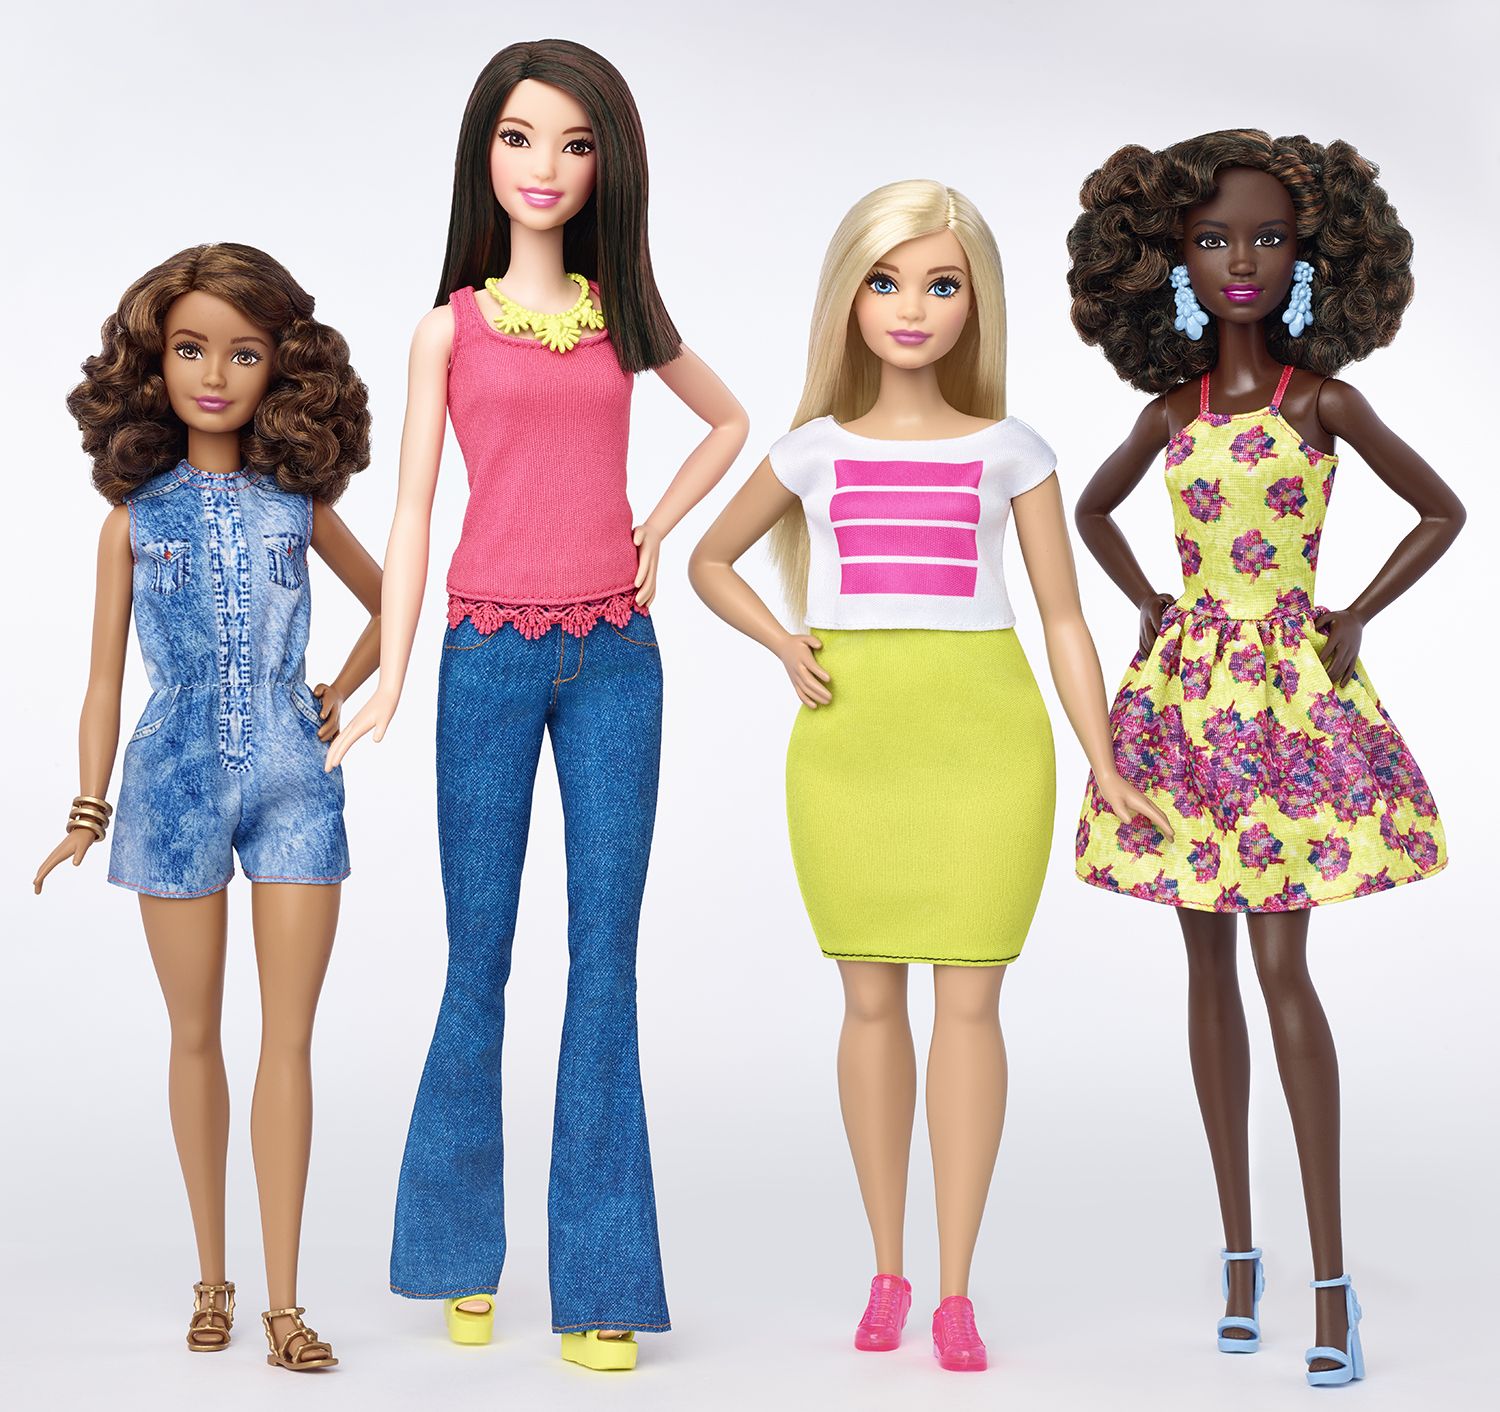 Barbie Fashionista Dolls Have Three New Body Types - Dolls Come in